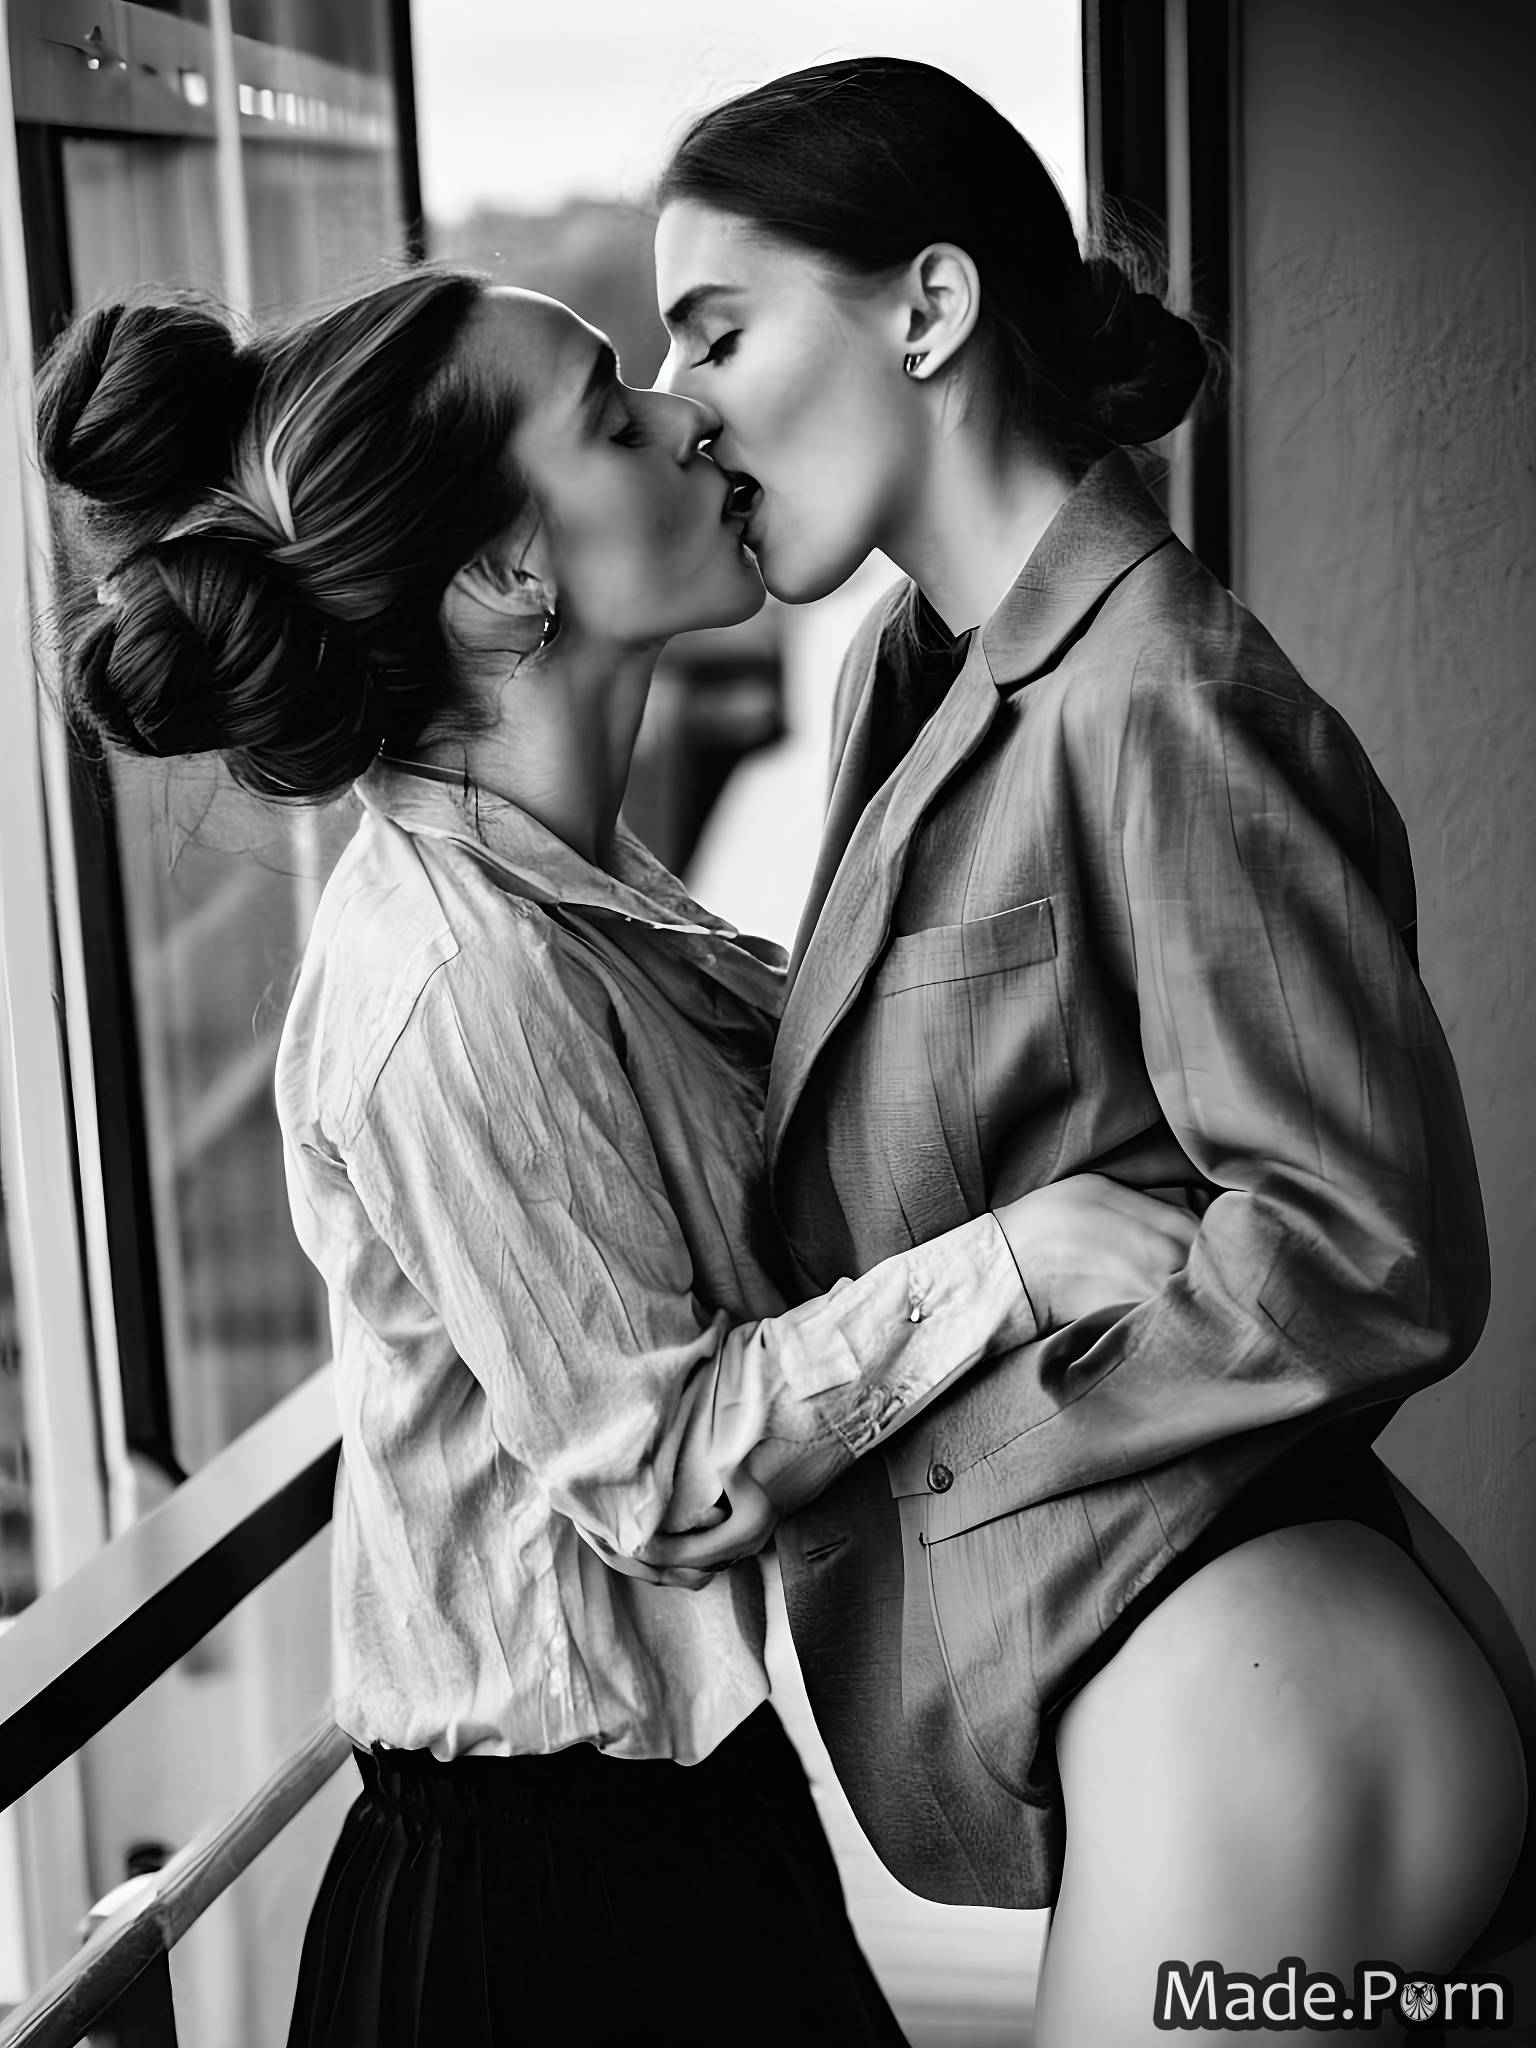 1536px x 2048px - Porn image of lesbian 90s hair bun balcony interracial kissing fully clothed  created by AI